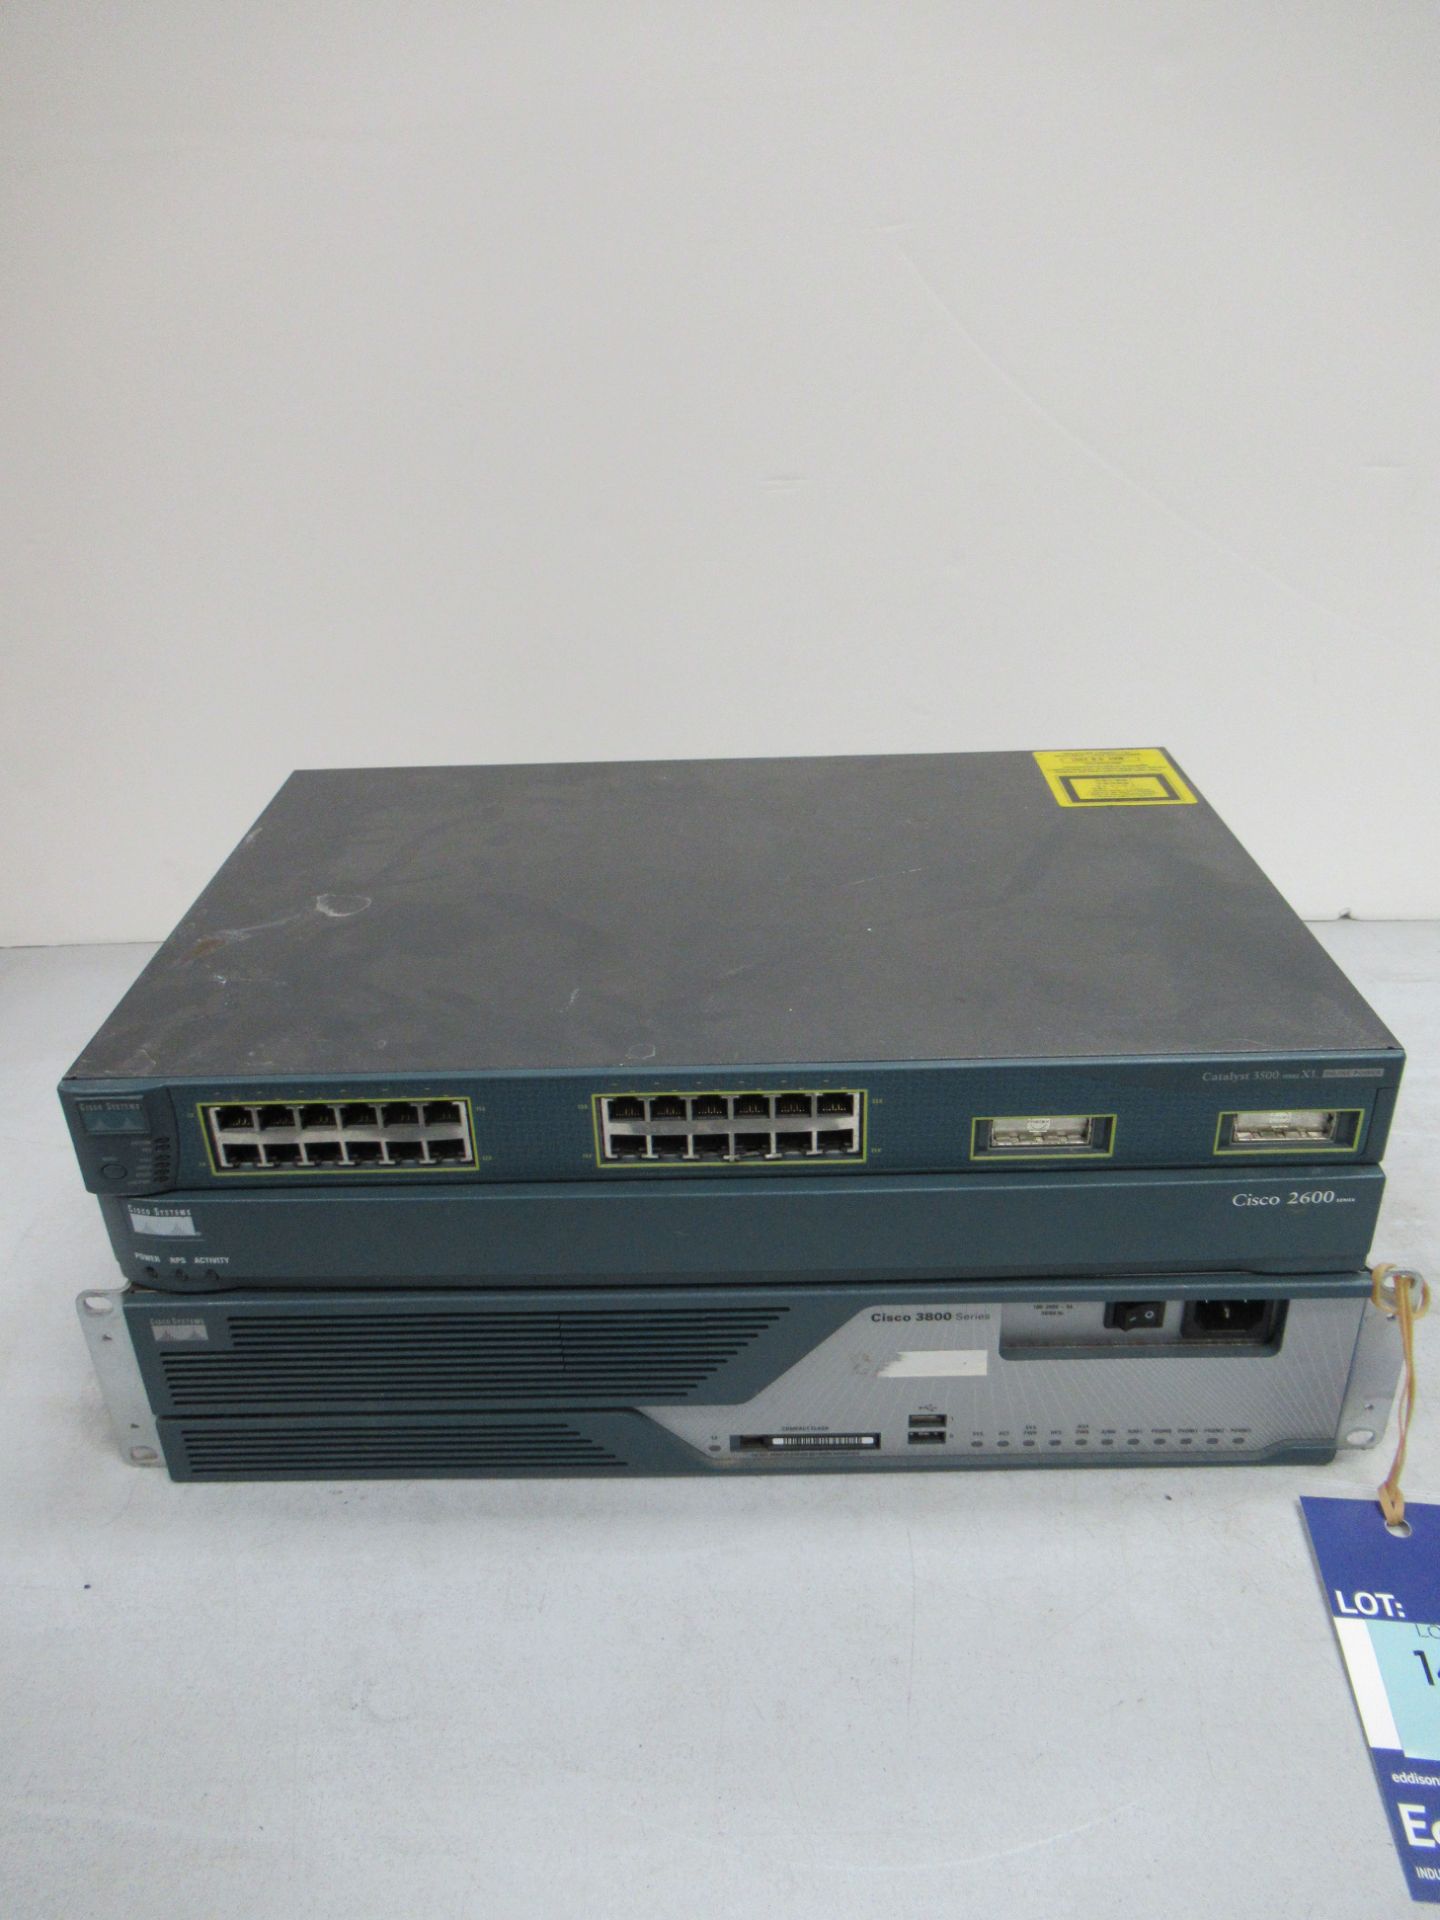 Cisco 3800 Series Console, Series 3500 XL Channel Switch and 2600 Console